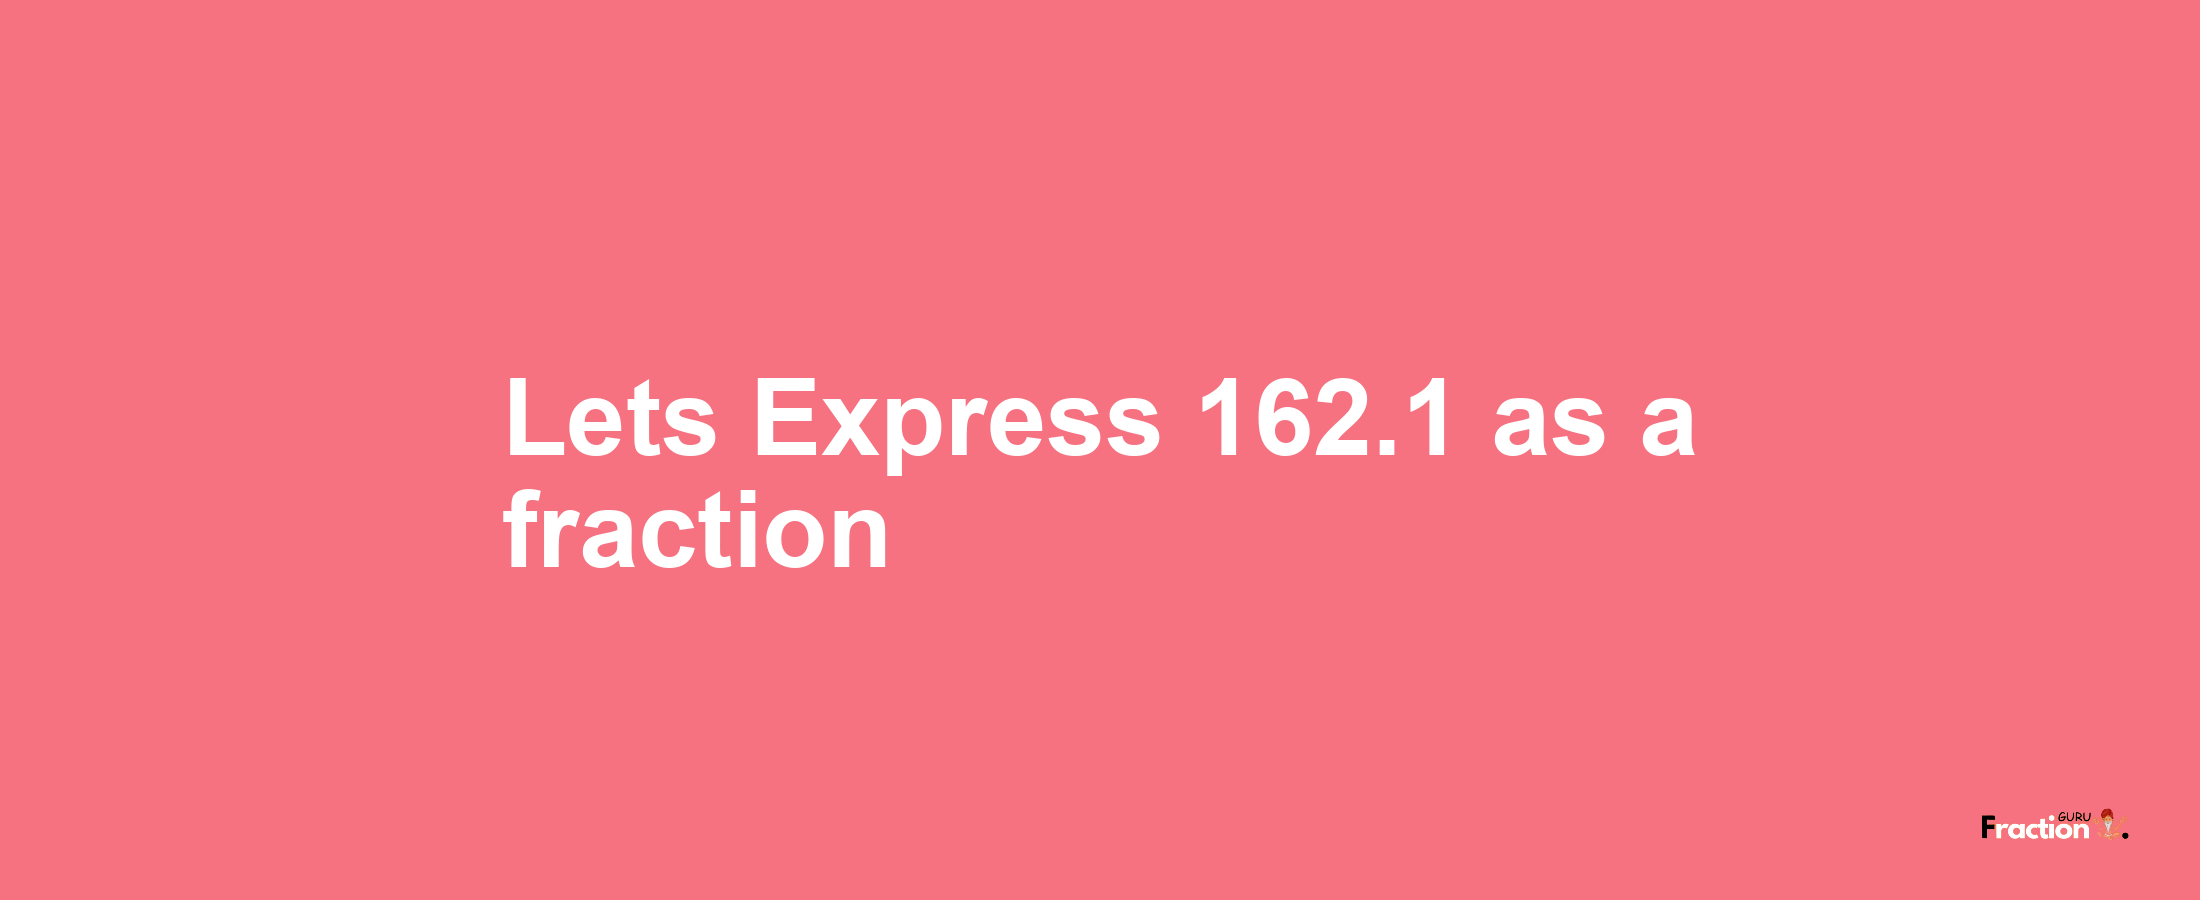 Lets Express 162.1 as afraction